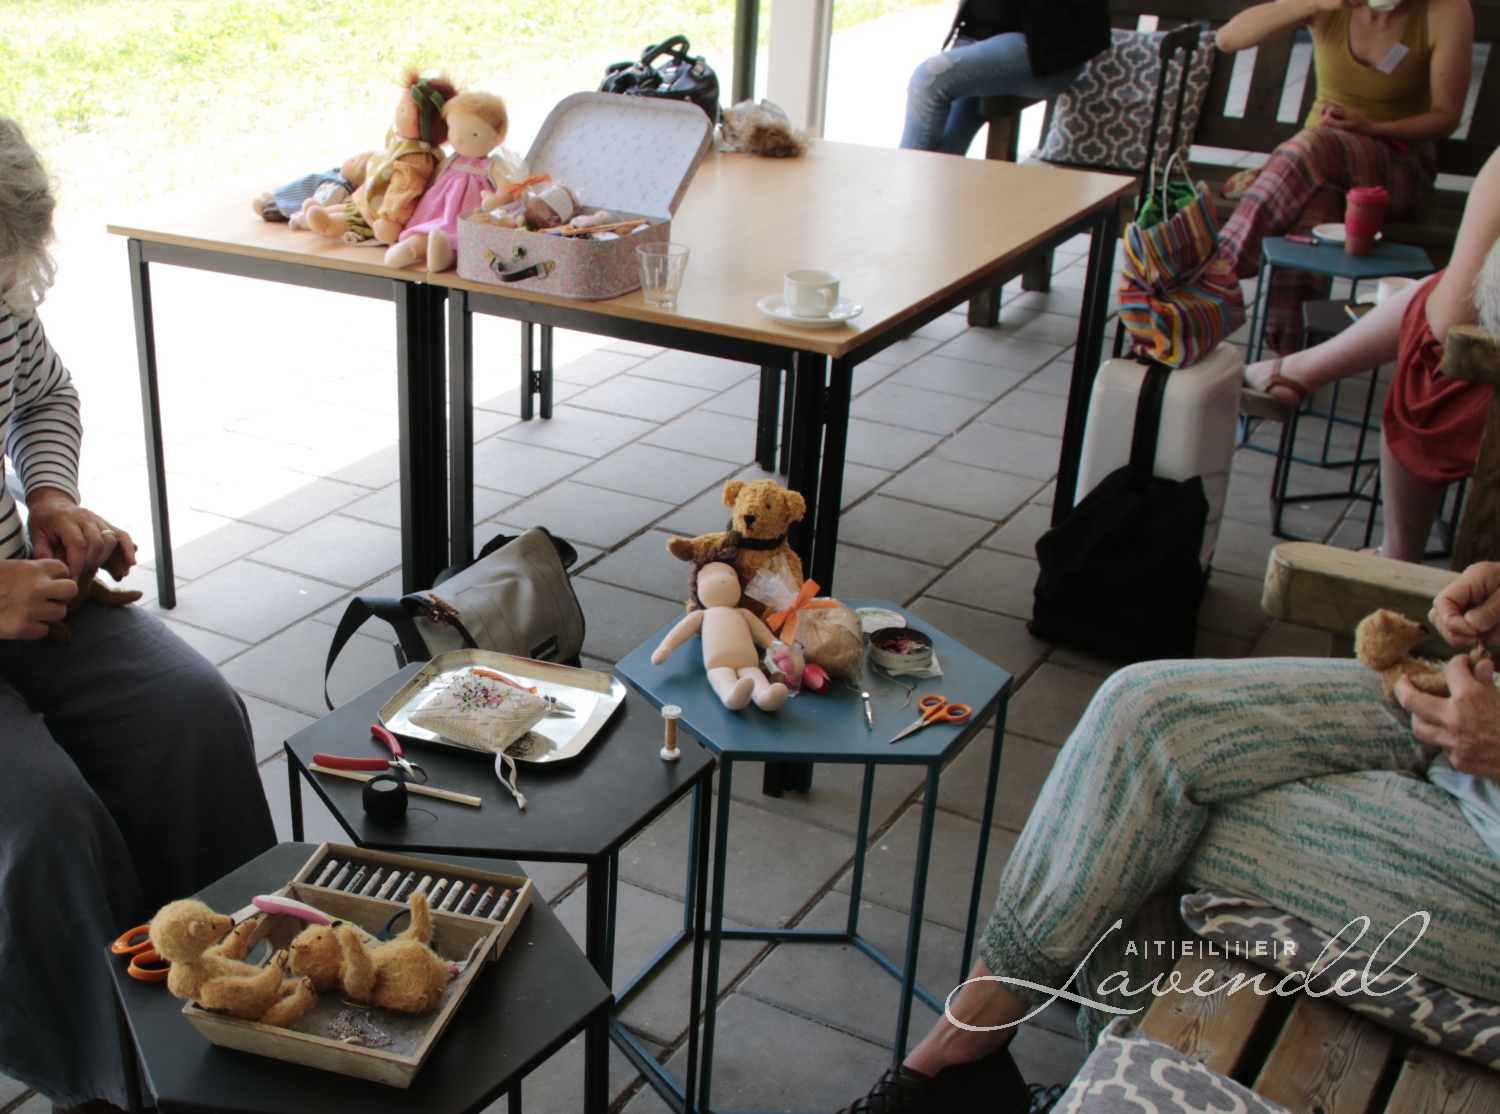 Atelier Lavendel Dolls: Waldorf Doll Seminar 2018 in Elspeet, the Netherlands, has passed as a firework of all kinds of beautiful impressions around the doll art and Waldorf doll making.